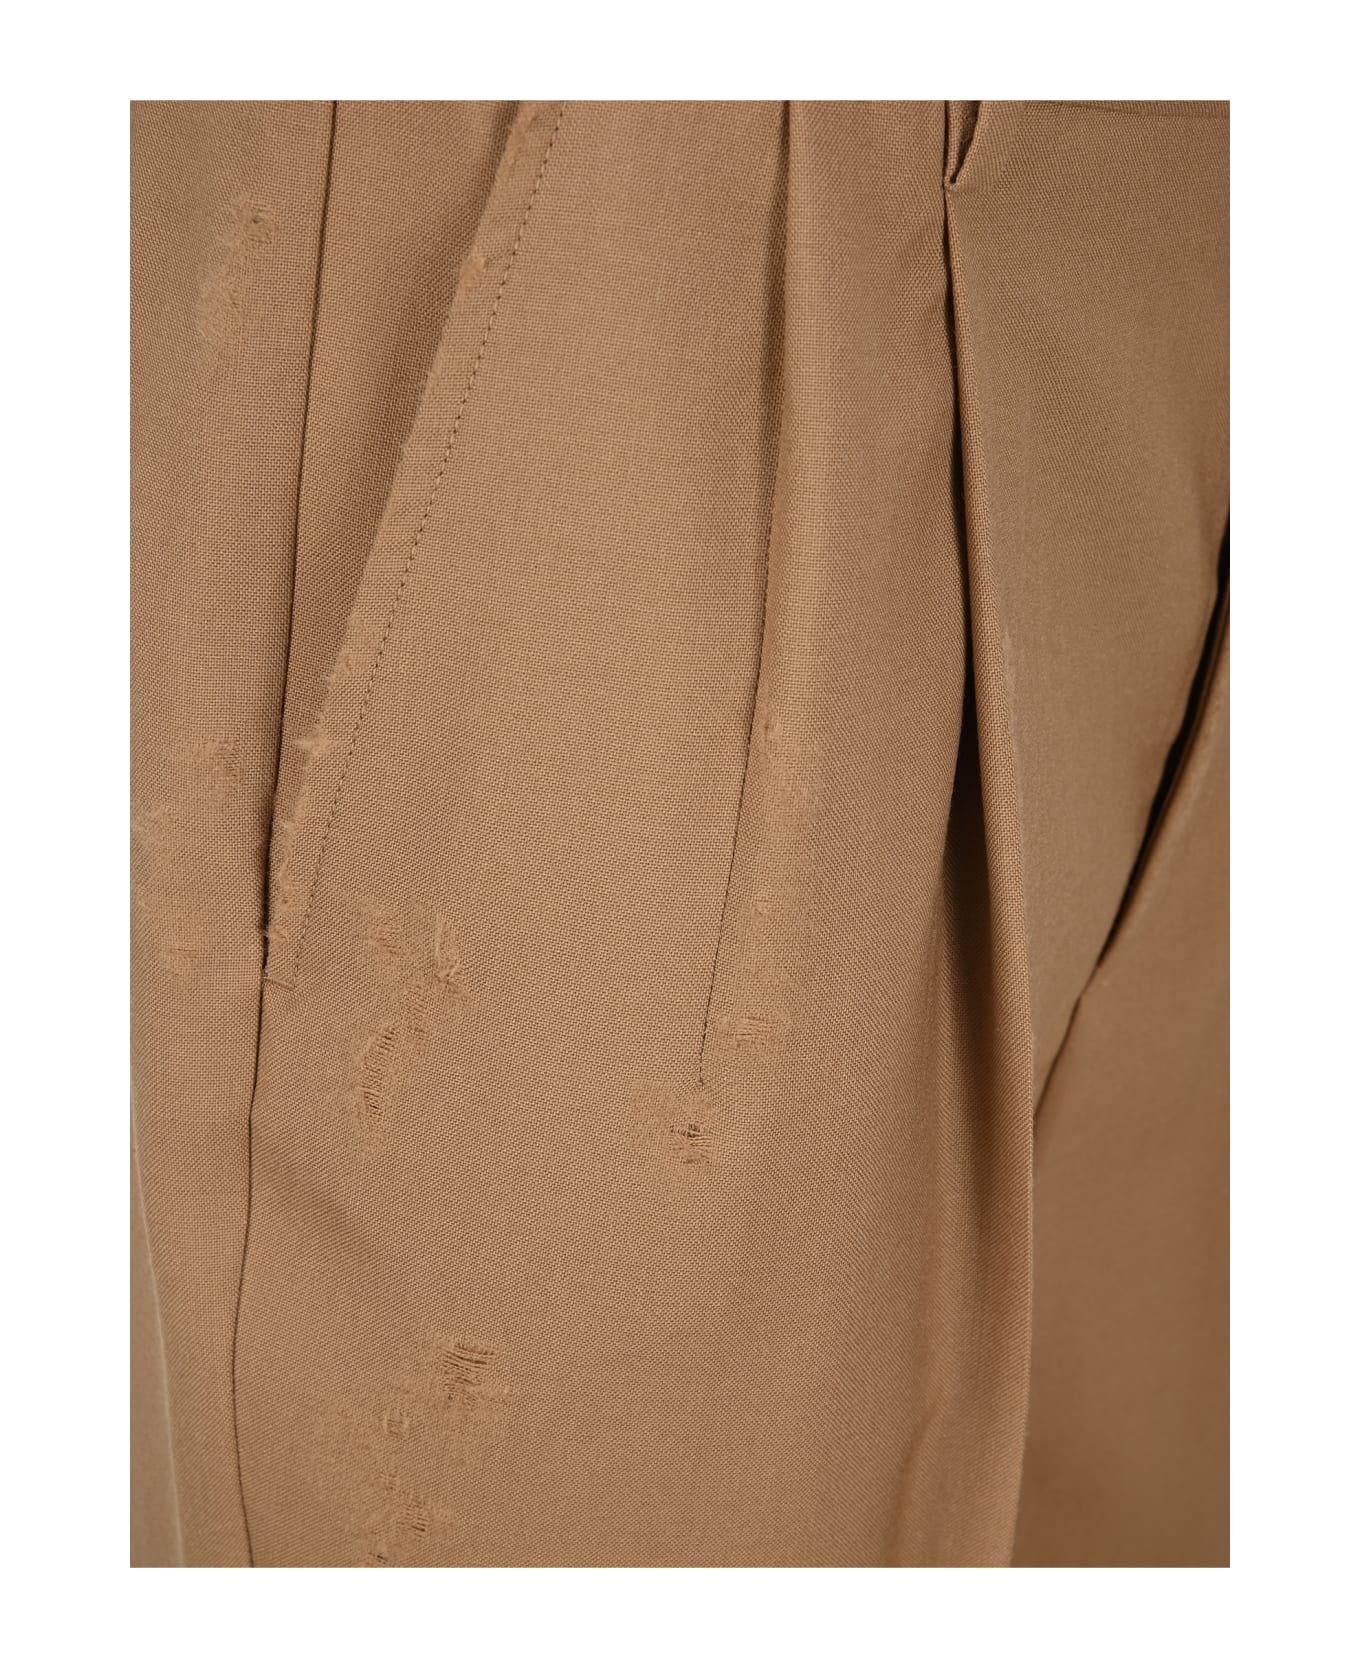 Marni Tailored Trousers - BEIGE